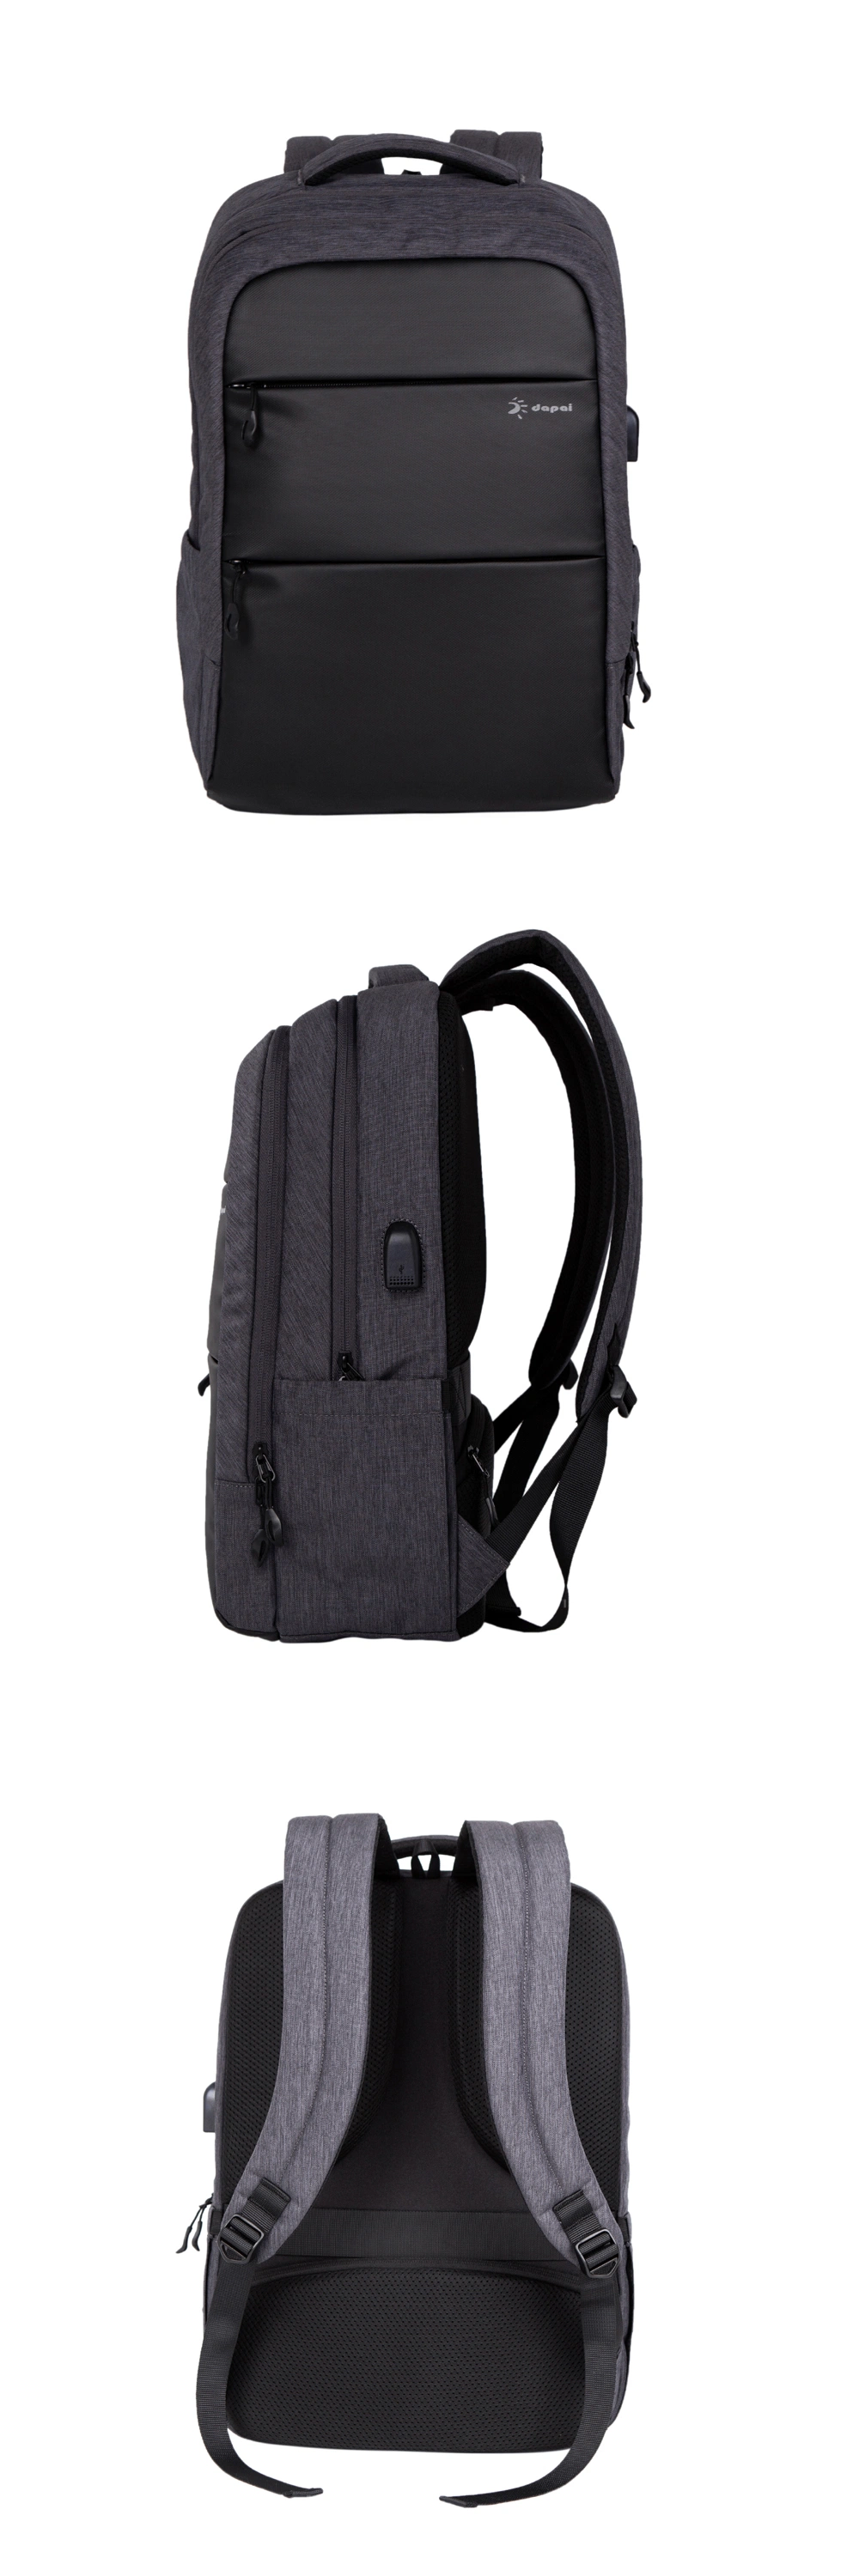 Travel Laptop Mens Women&prime;s Backpack Logo Customized with USB Charging Port Sports Backpack Business Casual Gym Backpack Bag Student Teenagers Computer Backpack